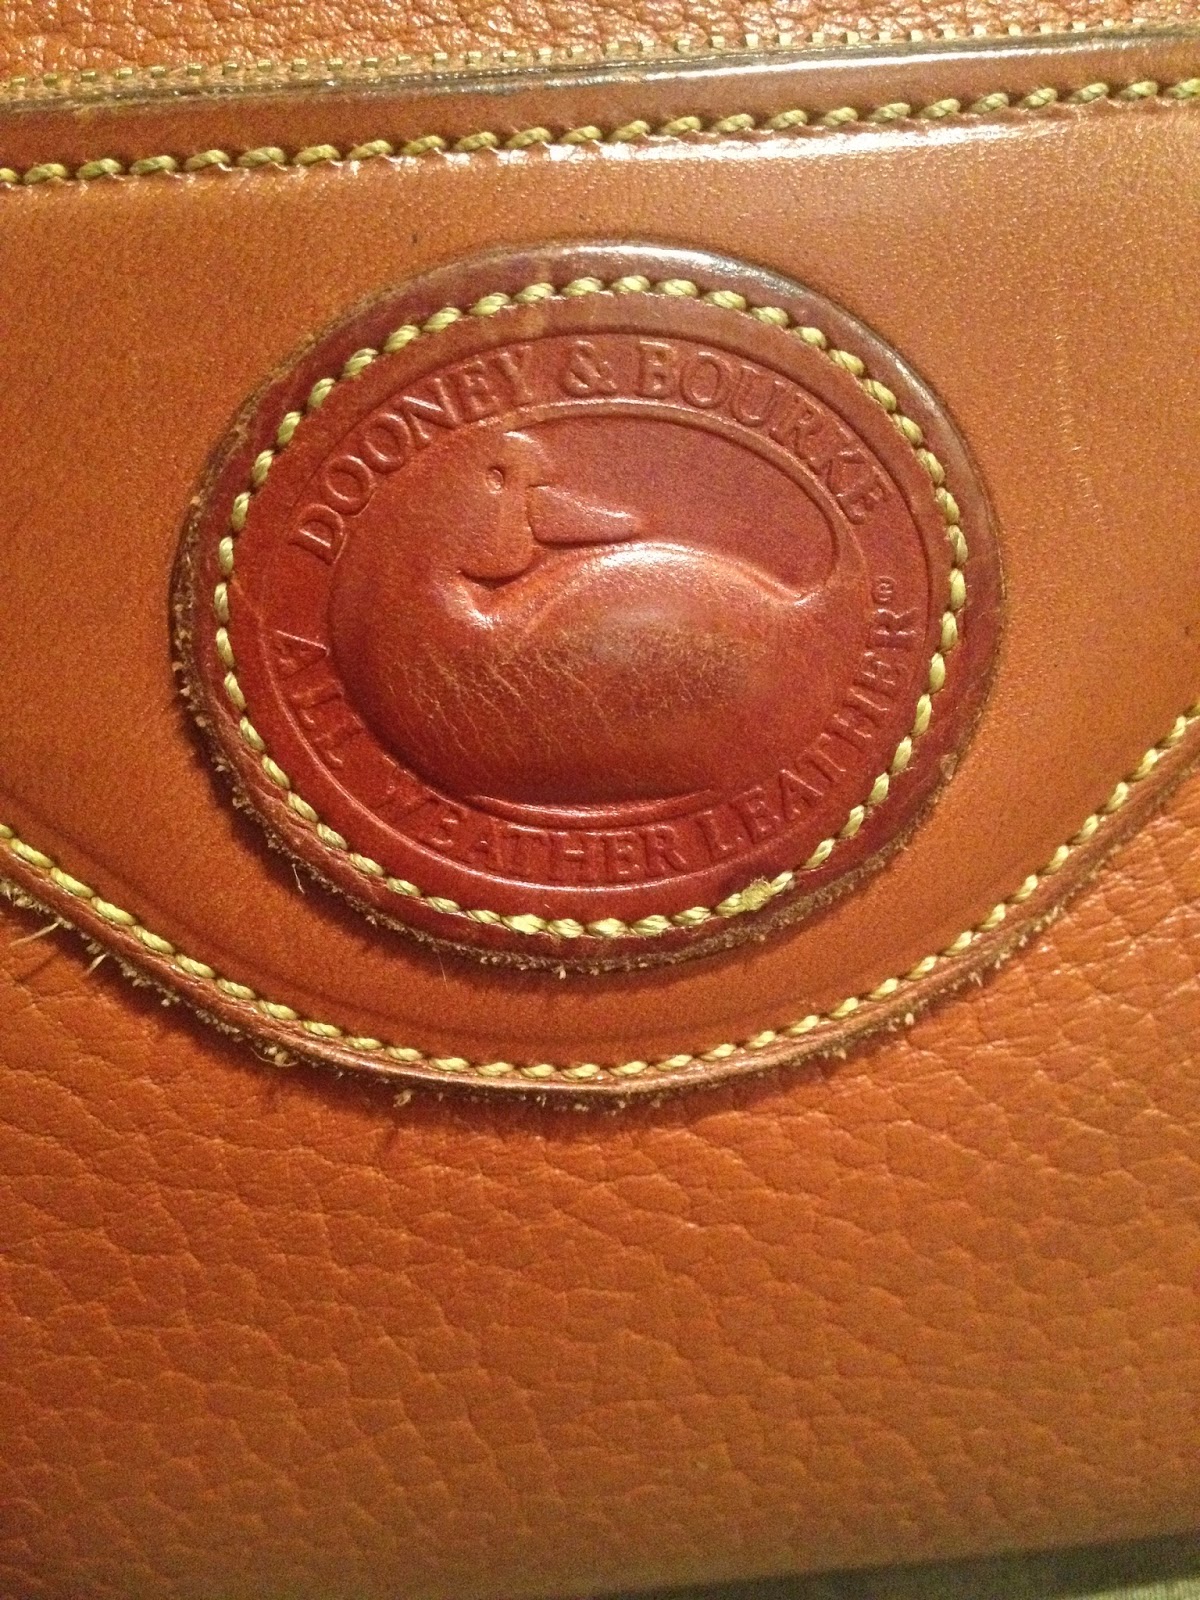 Blog About Bags: Authenticate Designer Handbags, Part Two: How to Tell ...